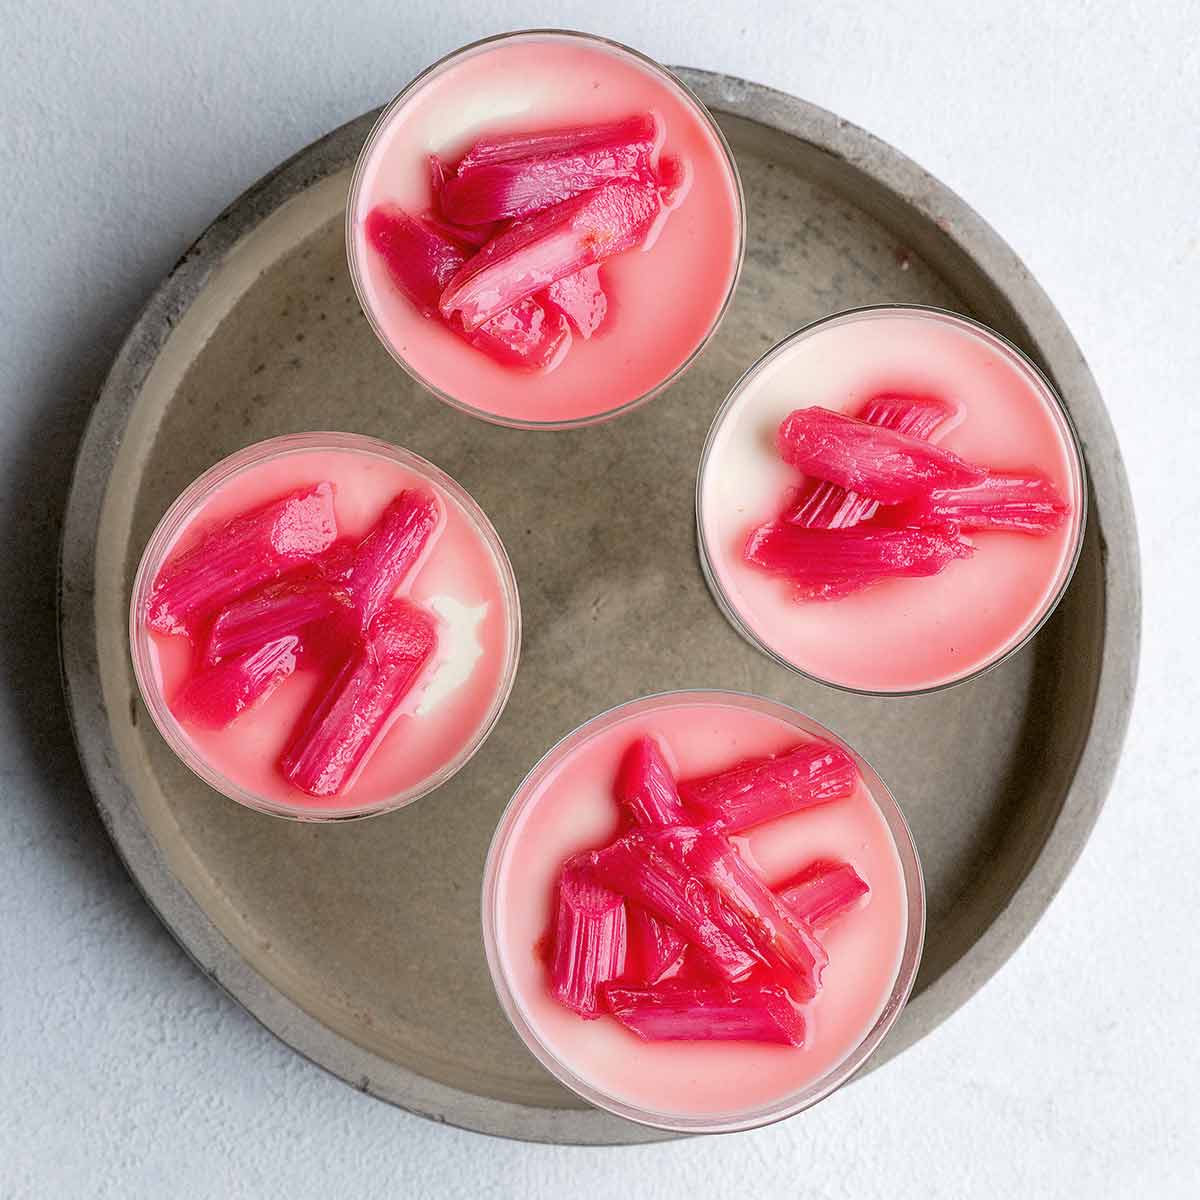 Four individual servings of cardamom panna cotta with rhubarb on a serving tray.